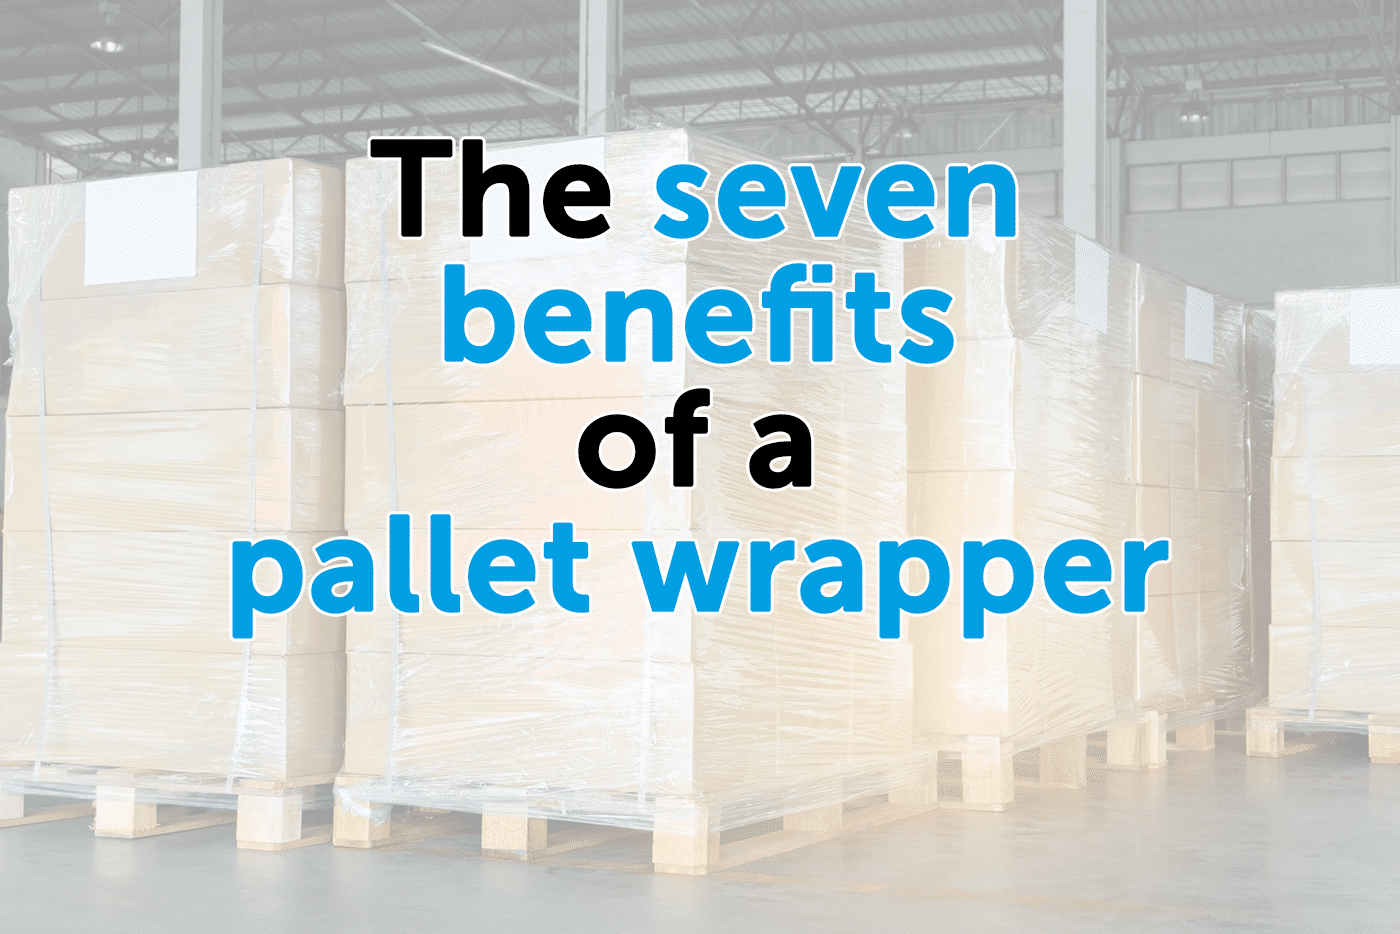 The seven benefits of a pallet wrapper